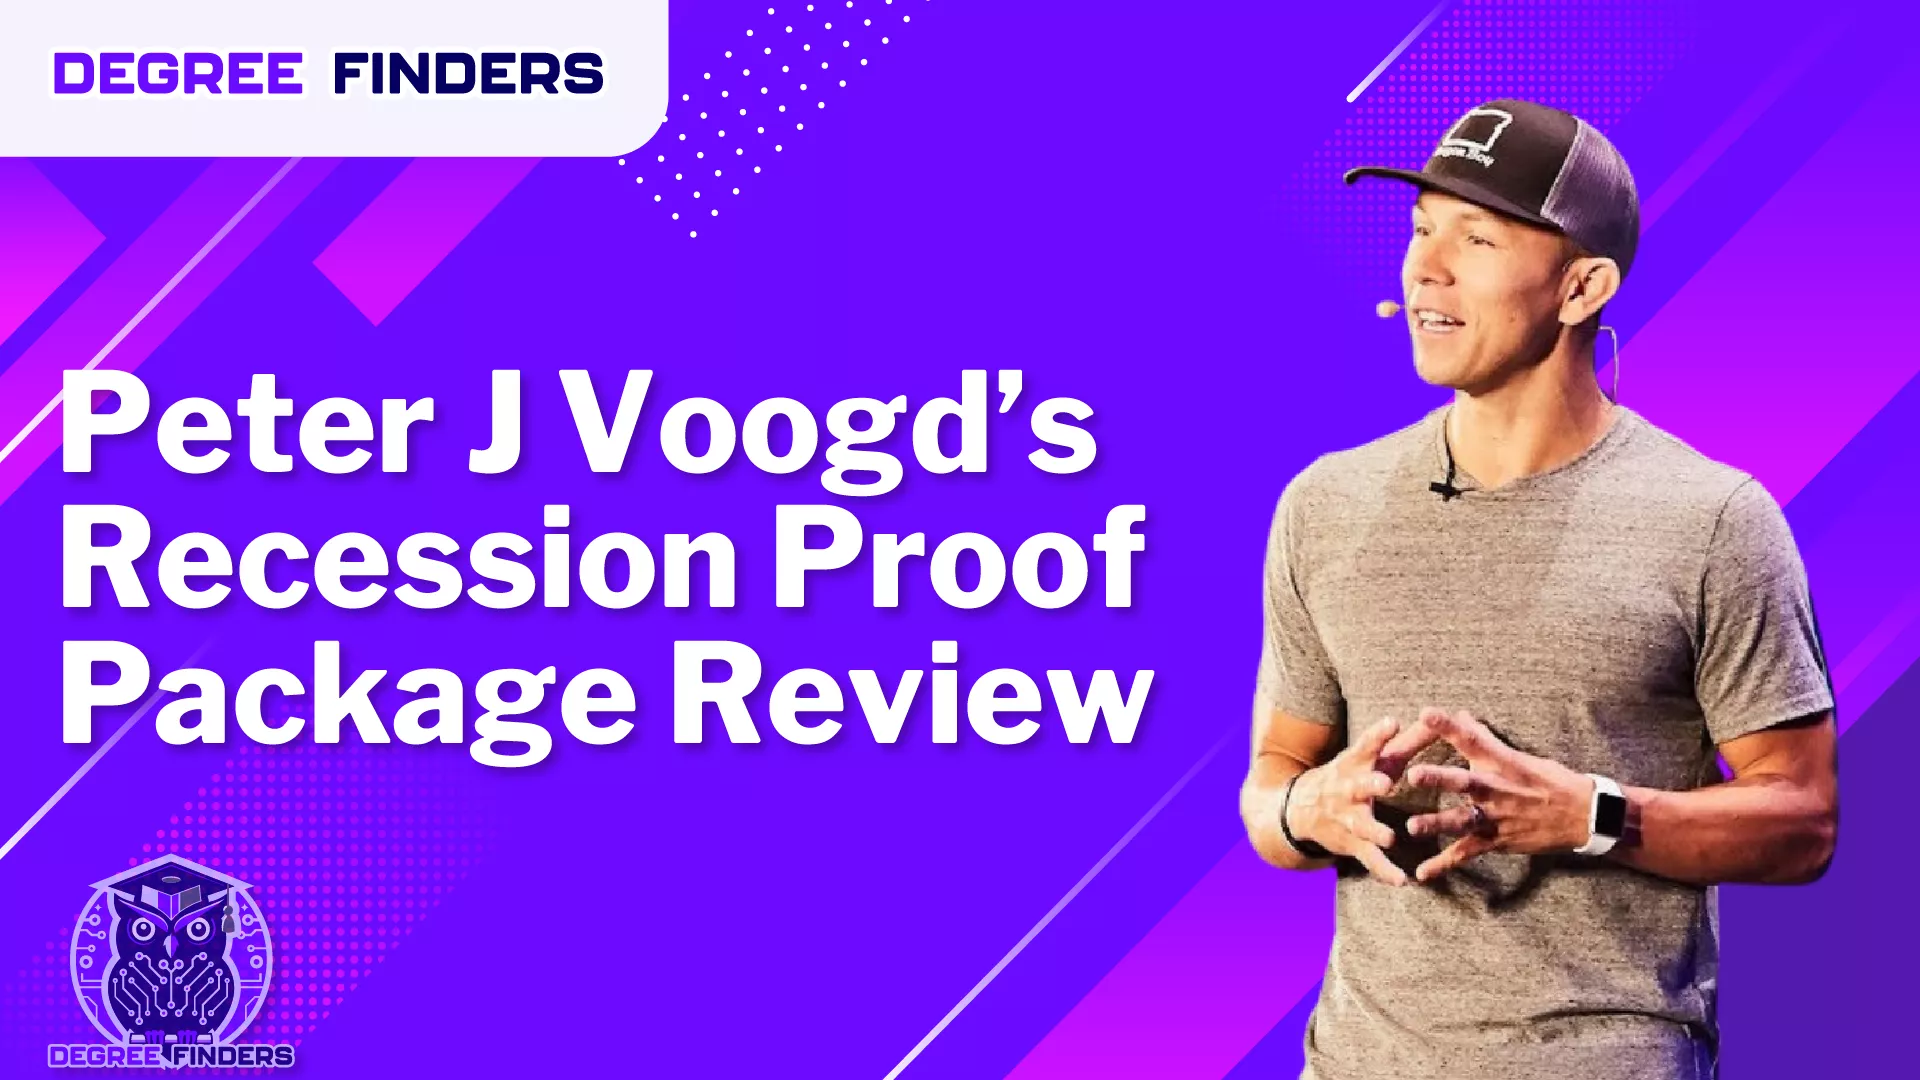 Peter J Voogd’s Recession Proof Package Review